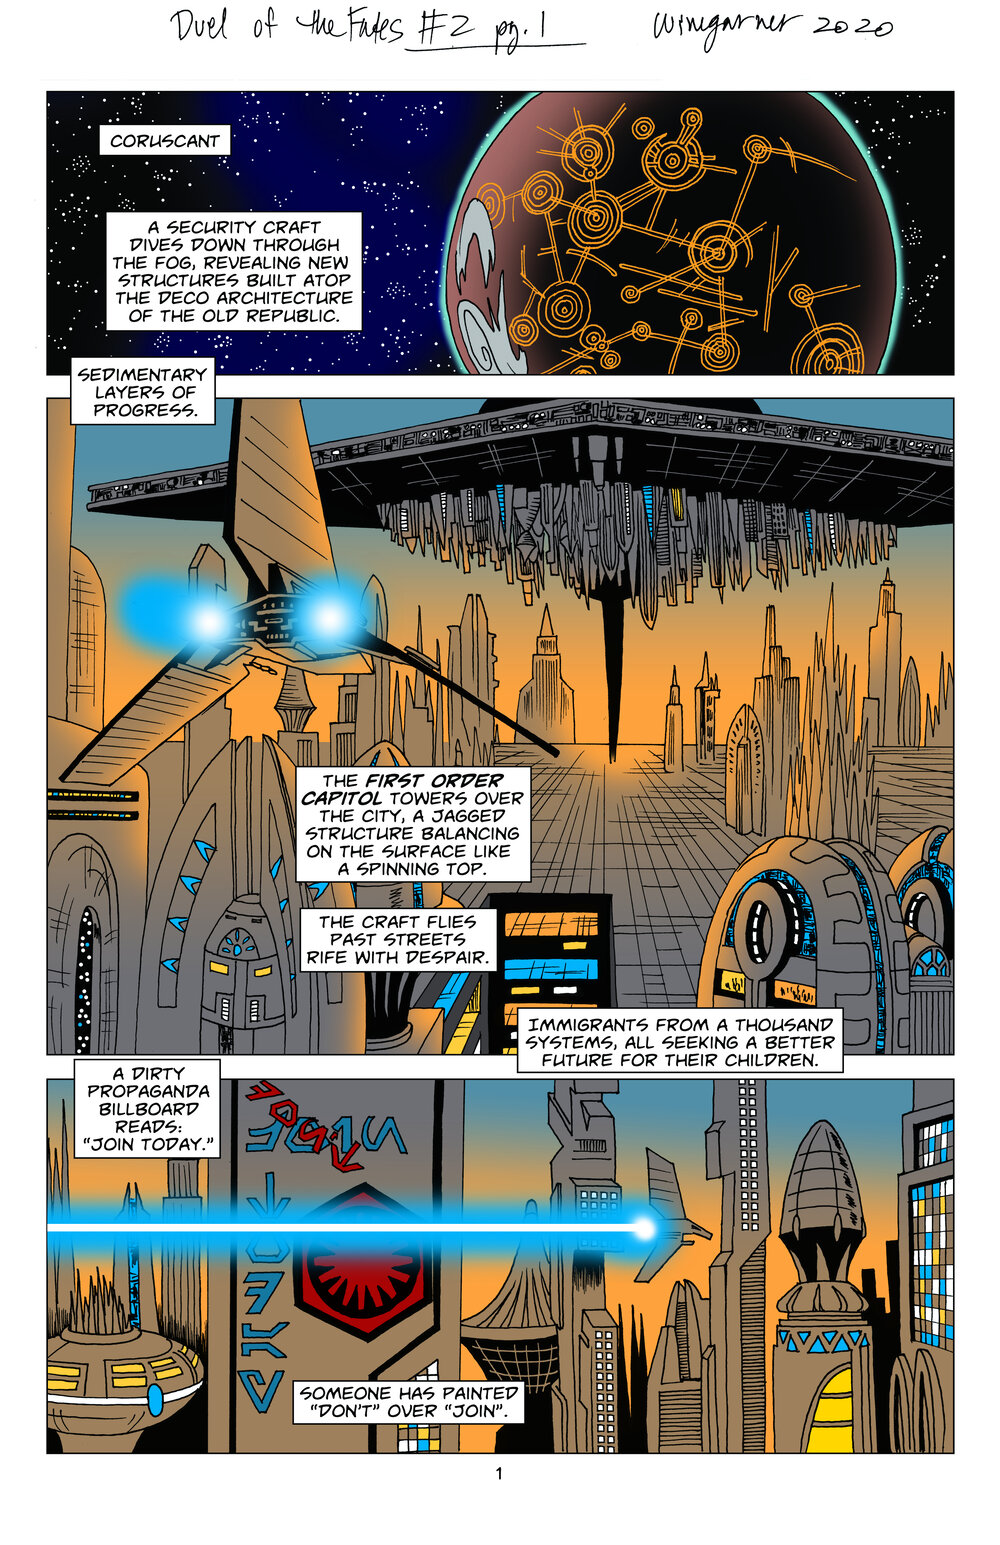 Star Wars: Duel of the Fates (2020-2021): Chapter 2 - Page 2